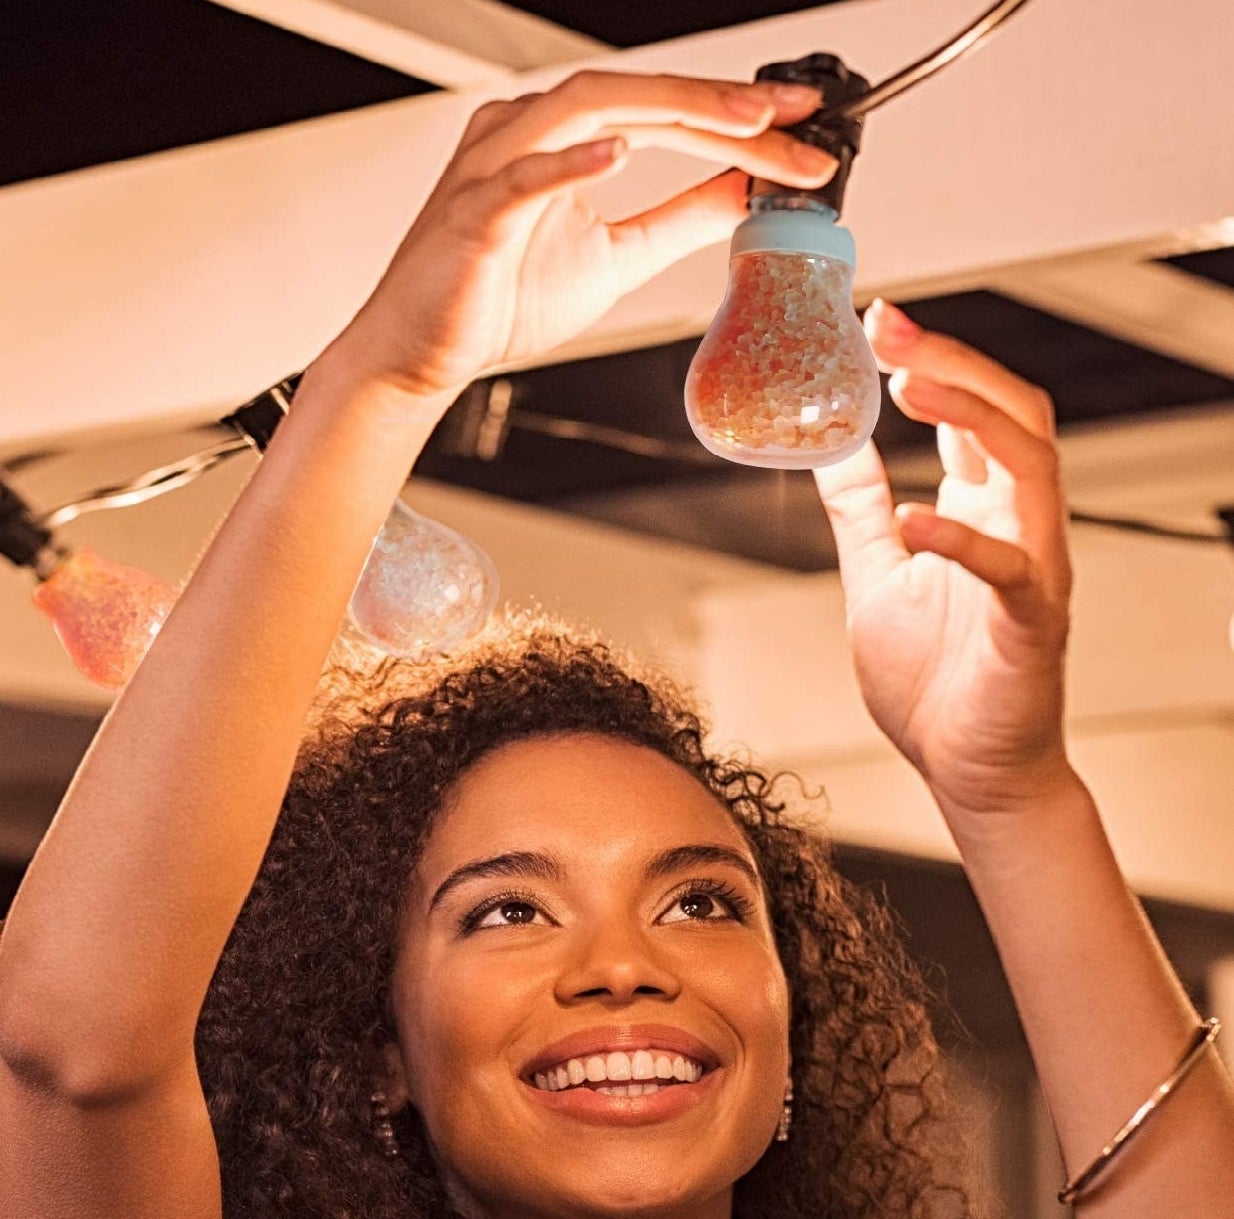 a smiling person installing a lightbulb filled with himalayan salt